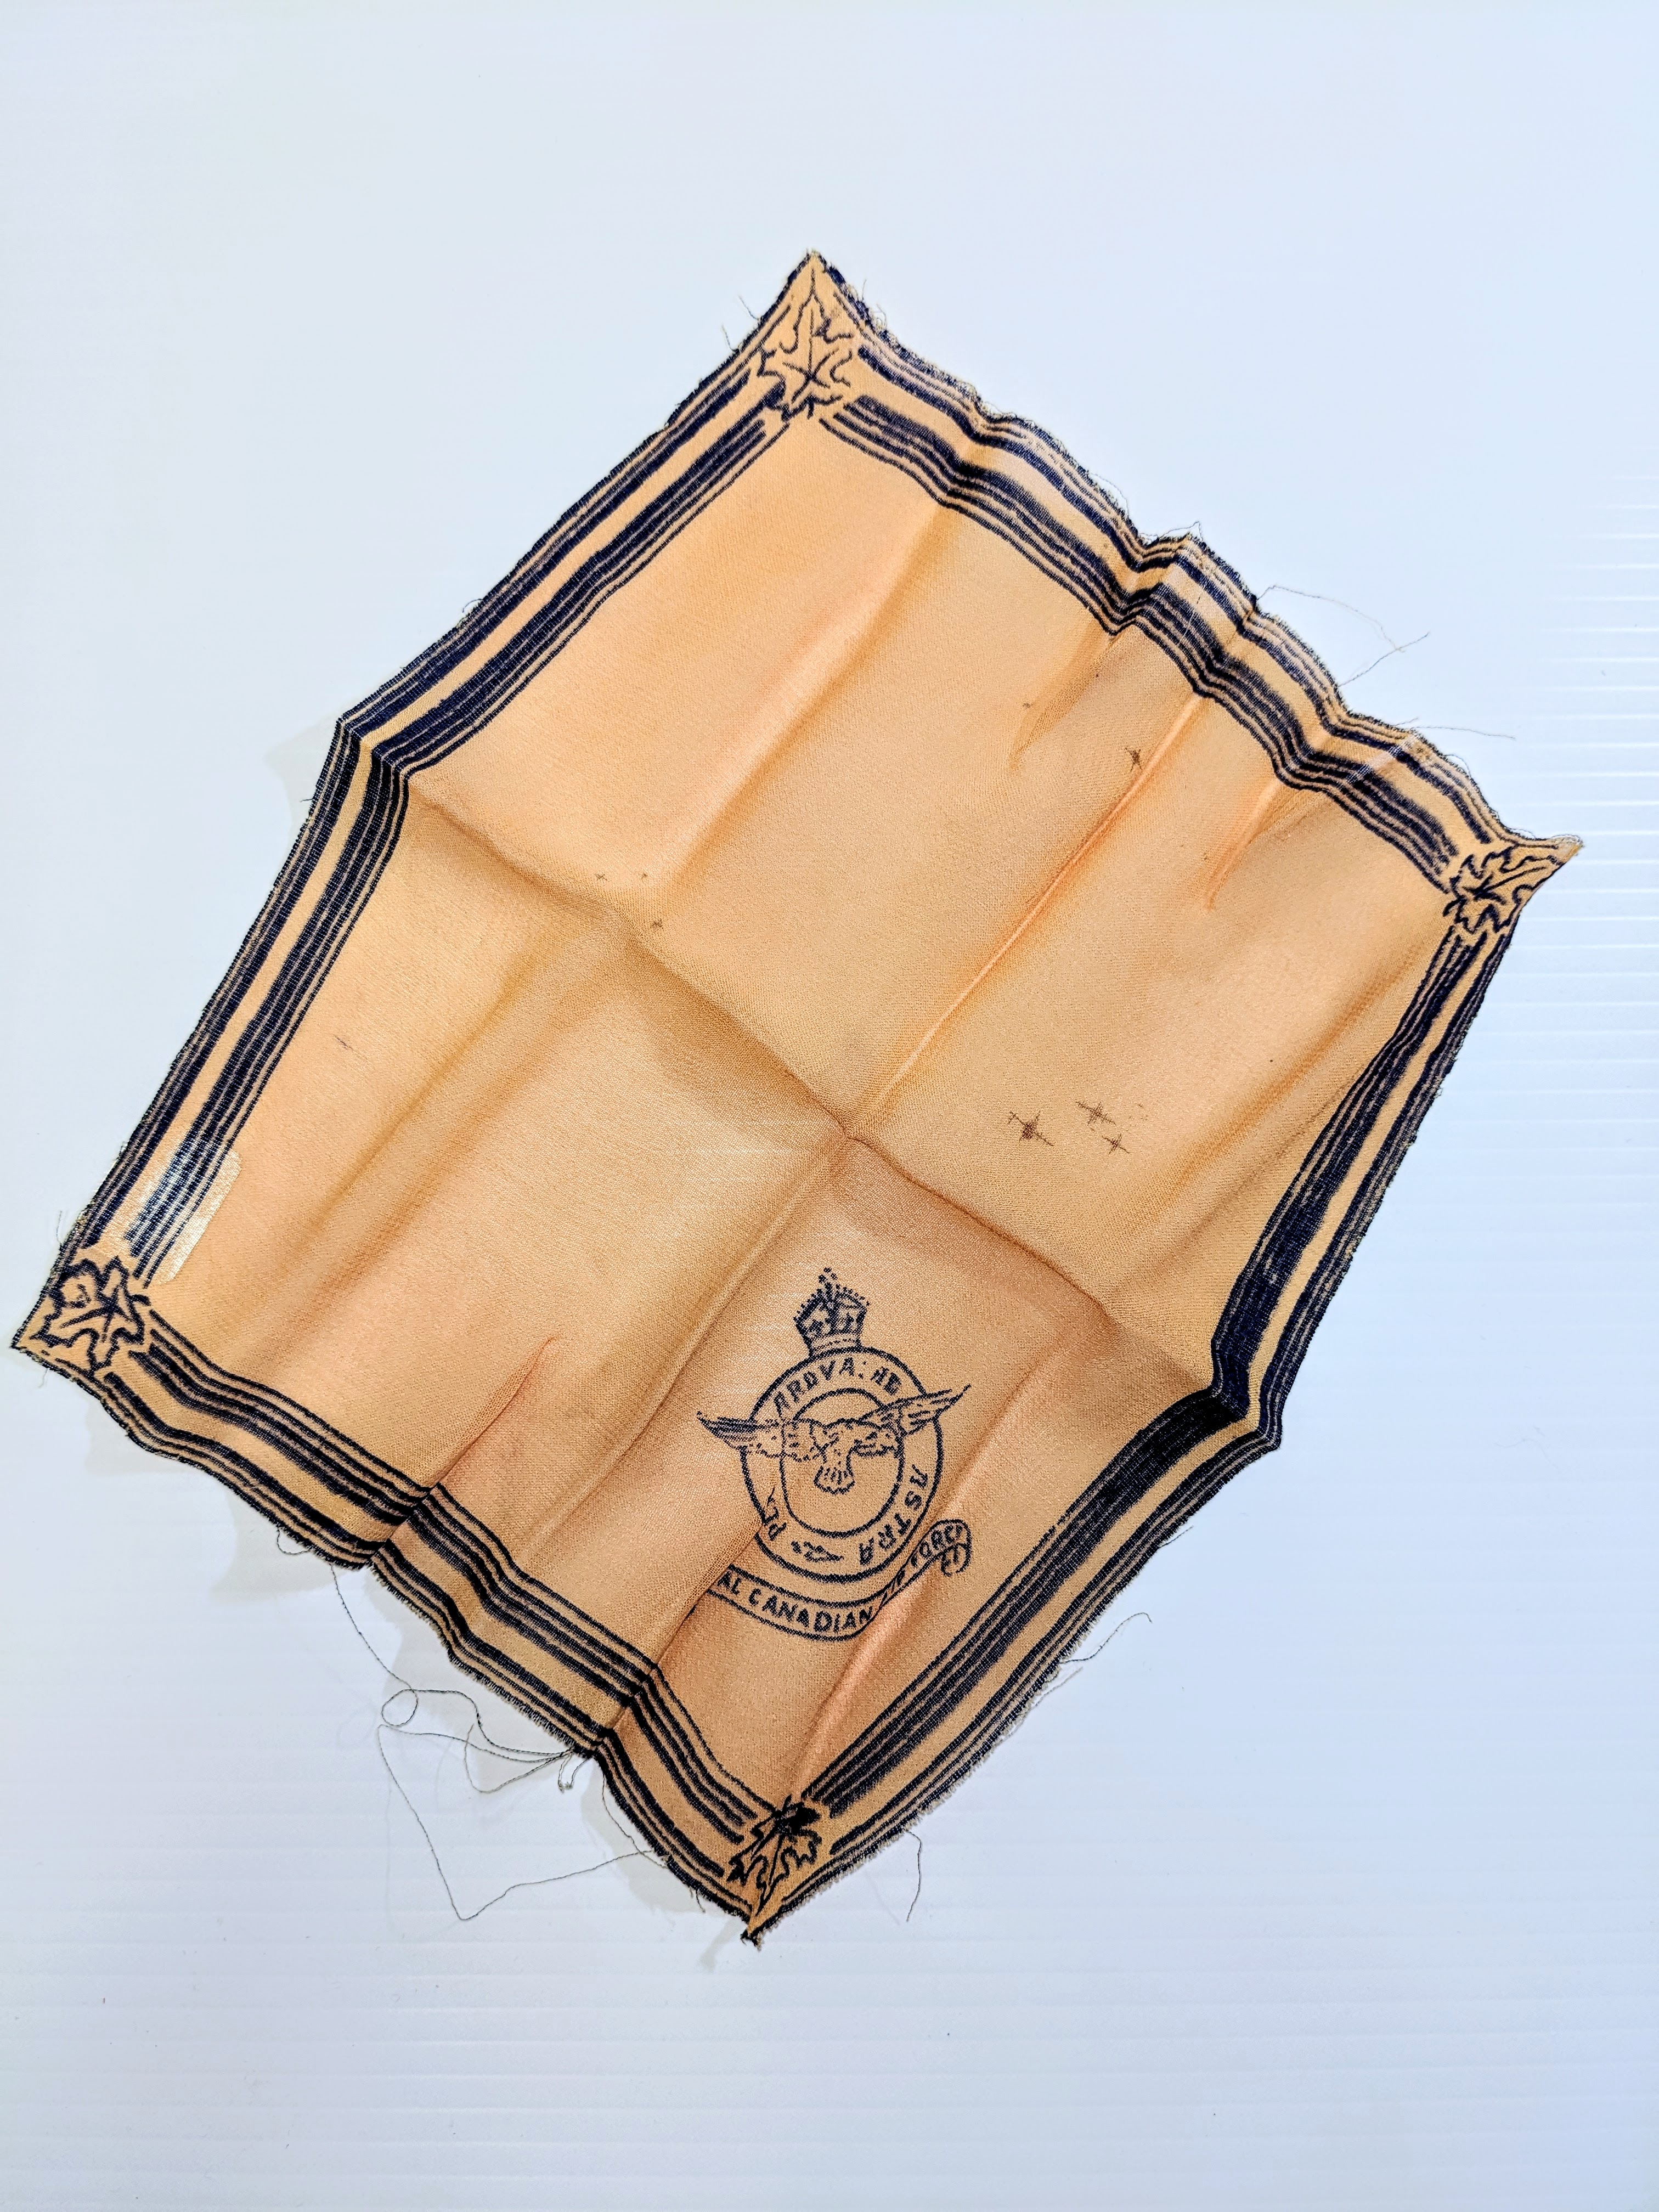 This is a handkerchief that Gordon Campbell sent back to his mother Edith while he was stationed overseas during WWII. Gordon enlisted to the Canadian Air Force in 1942 and was stationed in England - this handkerchief being sent back sometime during that service. This Friday (the 11th) we honor those who serve during Remembrance Day ceremonies taking place nation wide.
2001.02.48 / Campbell, Jean
7/11/2022